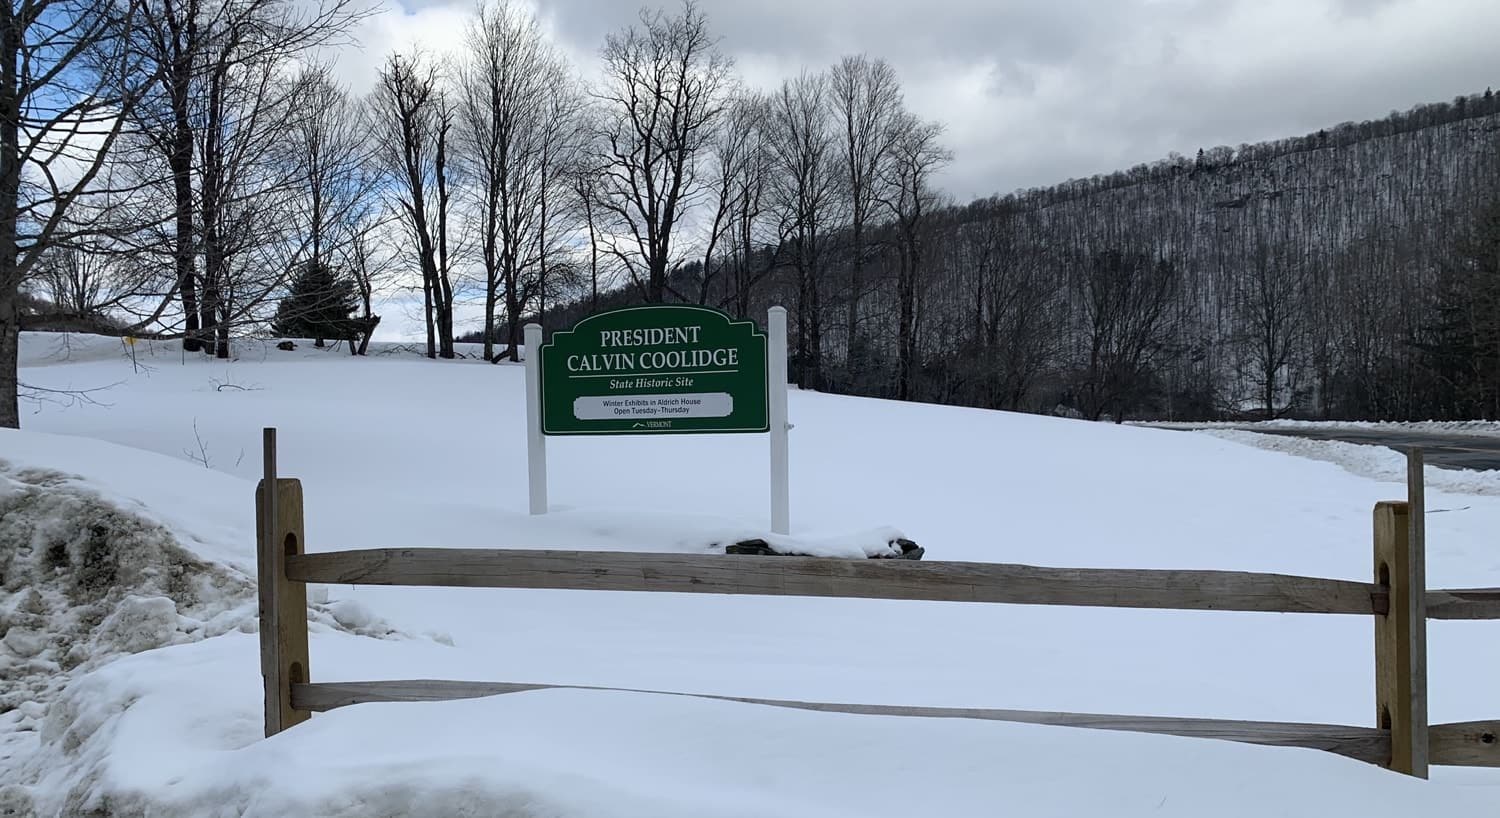 Green and white sign for President Calvin Coolidge State Historic Site surrounded by snow-covered ground and bare trees